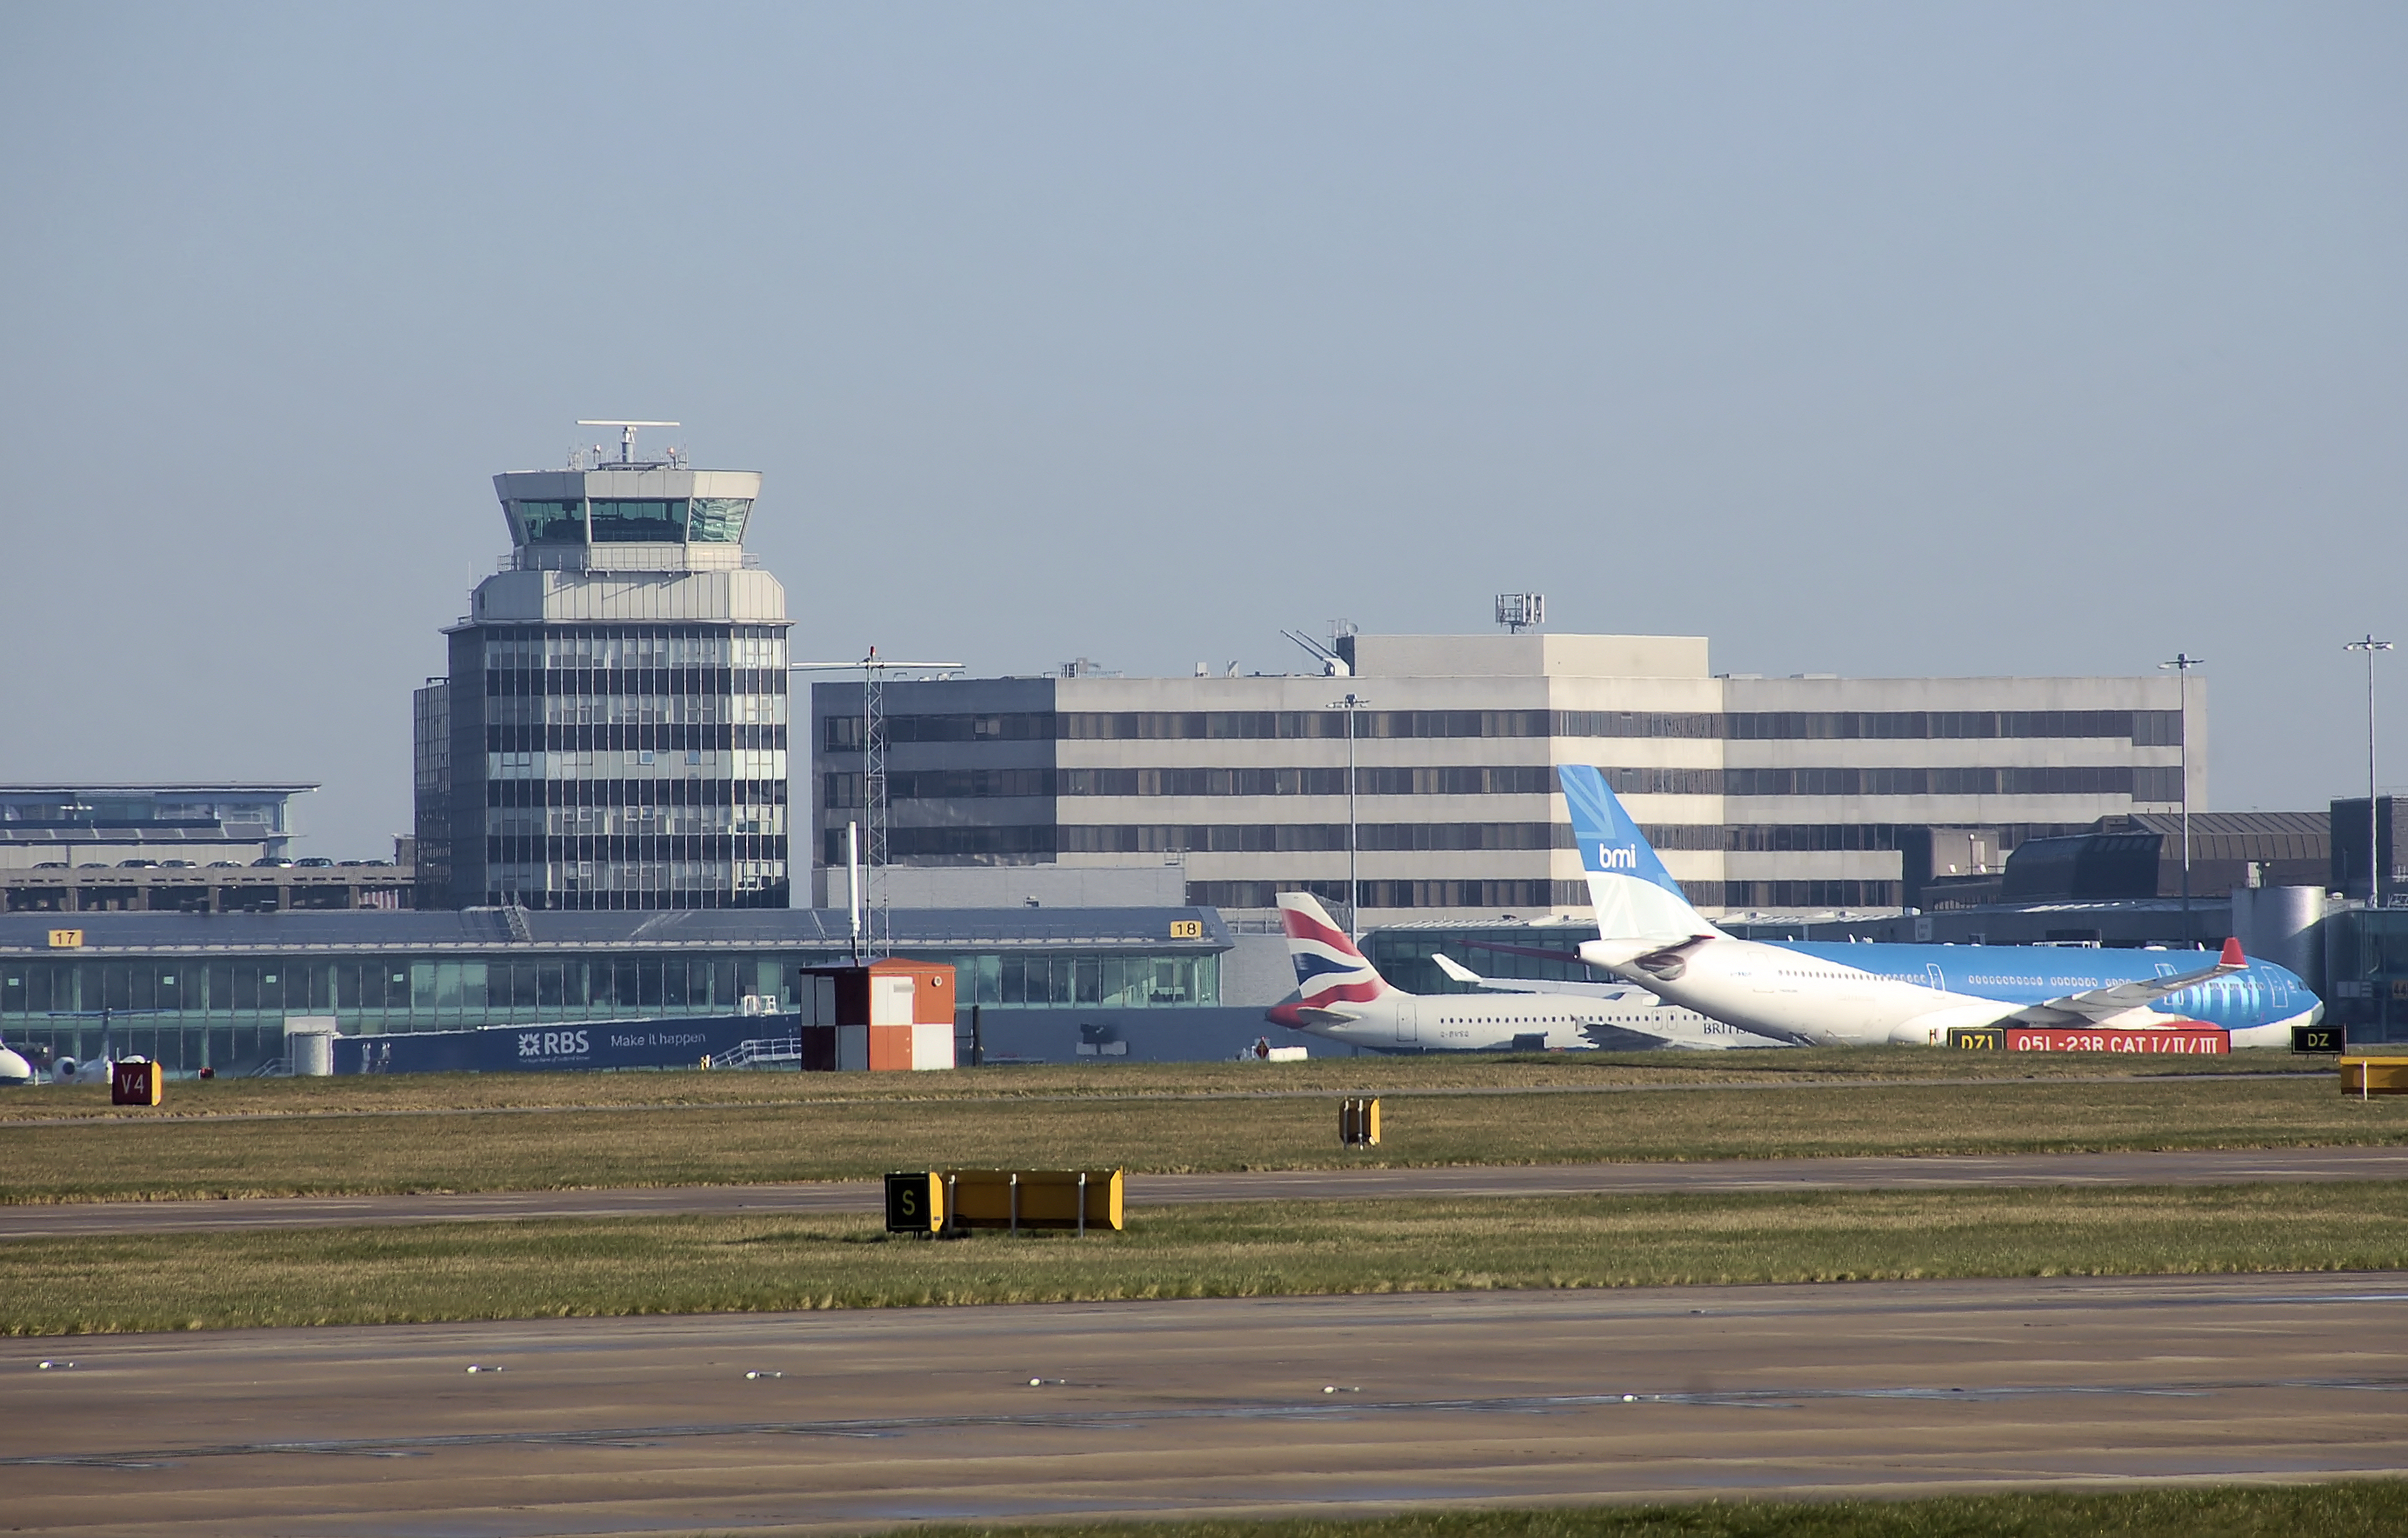 Manchester airport from the south arp